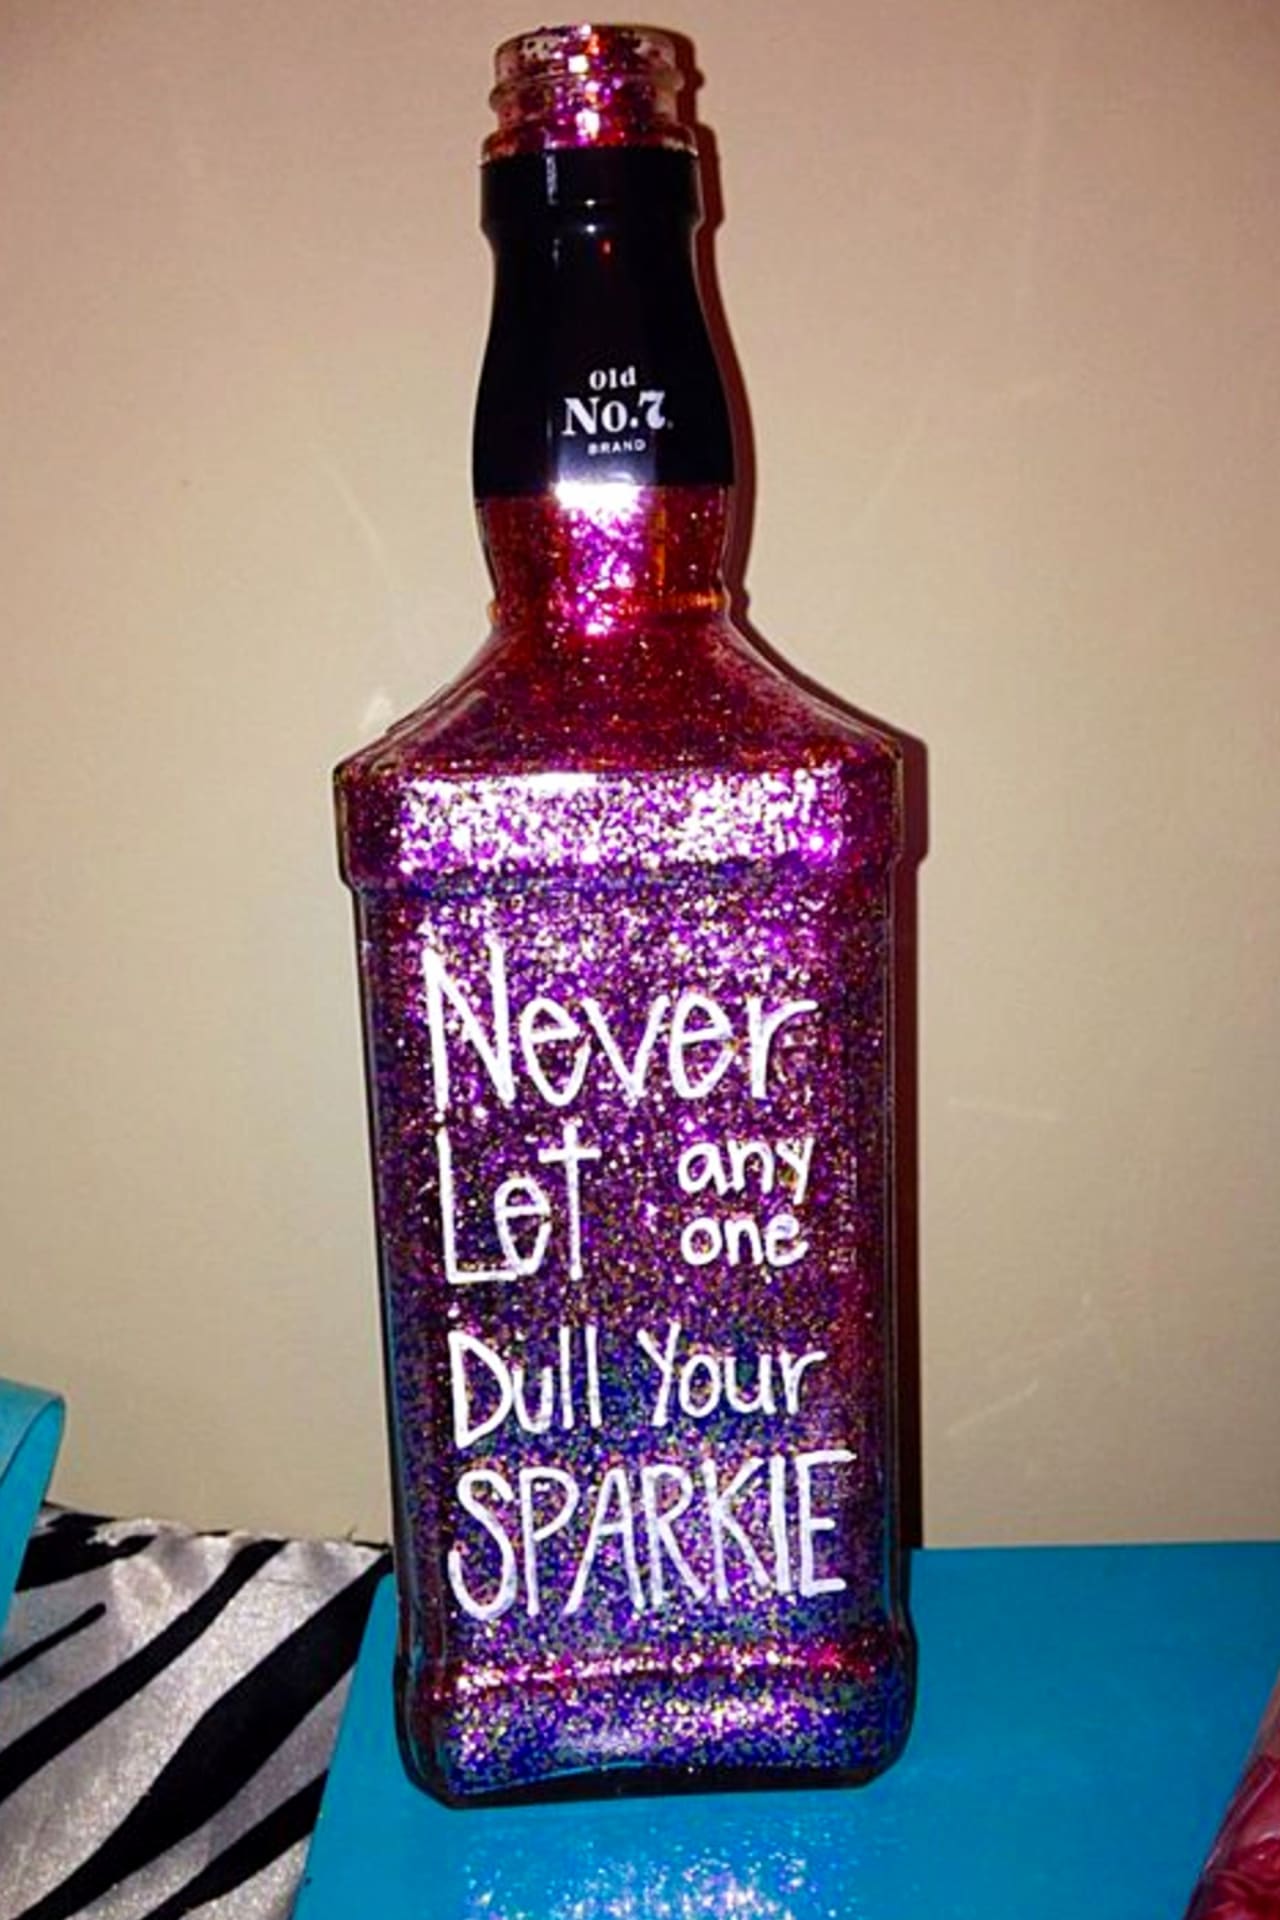 Whiskey bottle crafts -  DIY decor made with Jack Daniels bottles - beautiful empty bottle crafts and painted bottle craft projects to make and decorate your room without spending money. Cheap decorating ideas for your home, apartment, bedroom or dorm room for decorating on a budget